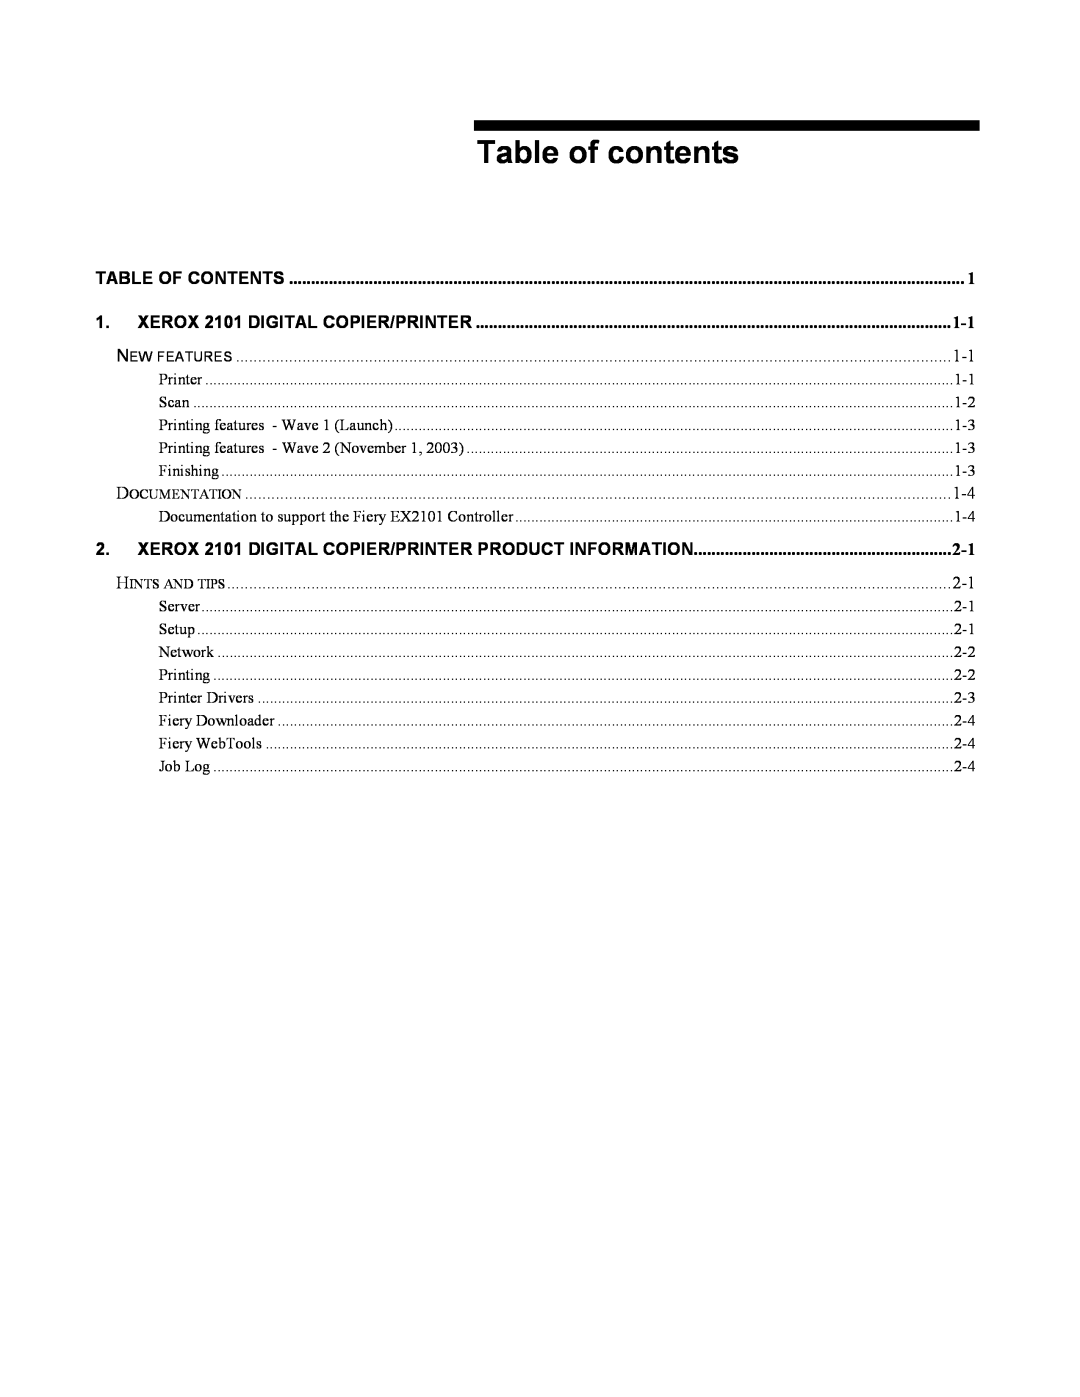 Xerox manual Table of contents, Table Of Contents, XEROX 2101 DIGITAL COPIER/PRINTER, New Features, Documentation 